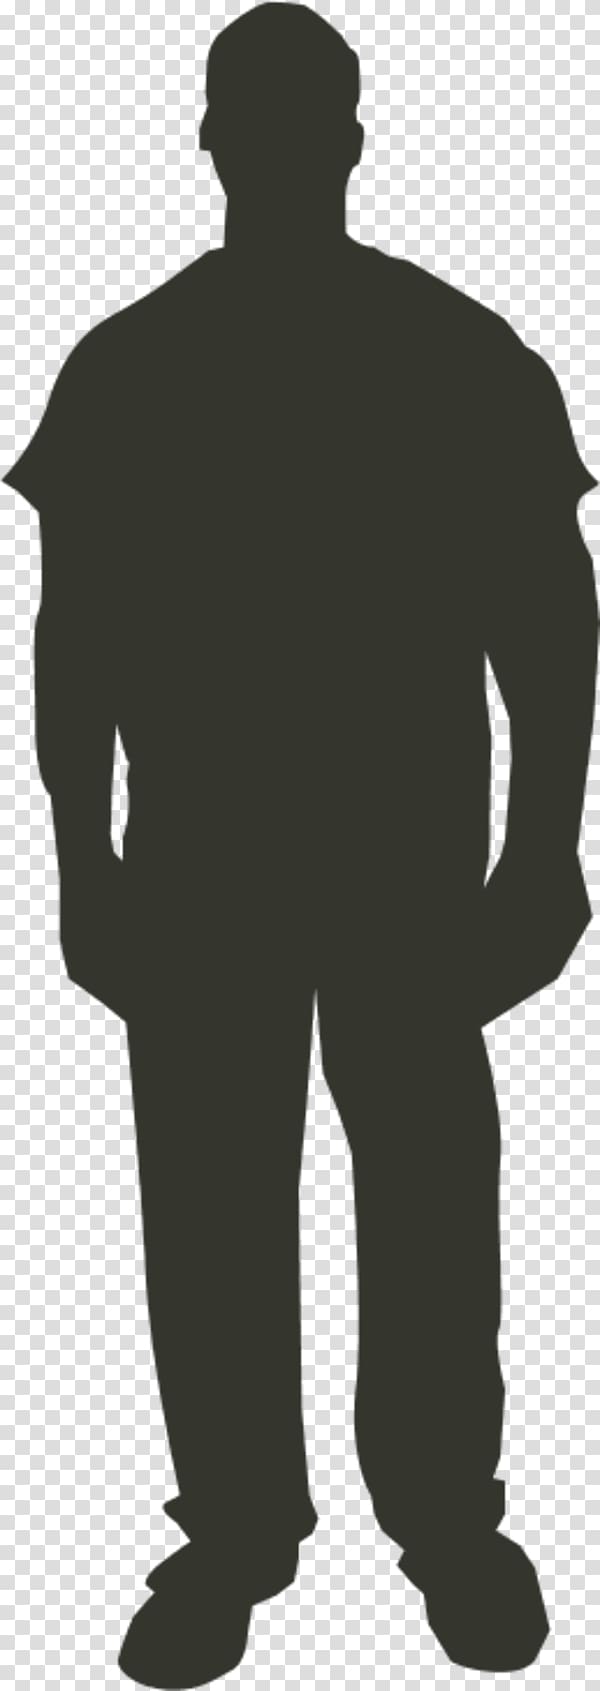 silhouette of man, Person Outline , Man Standing Silhouette transparent background PNG clipart